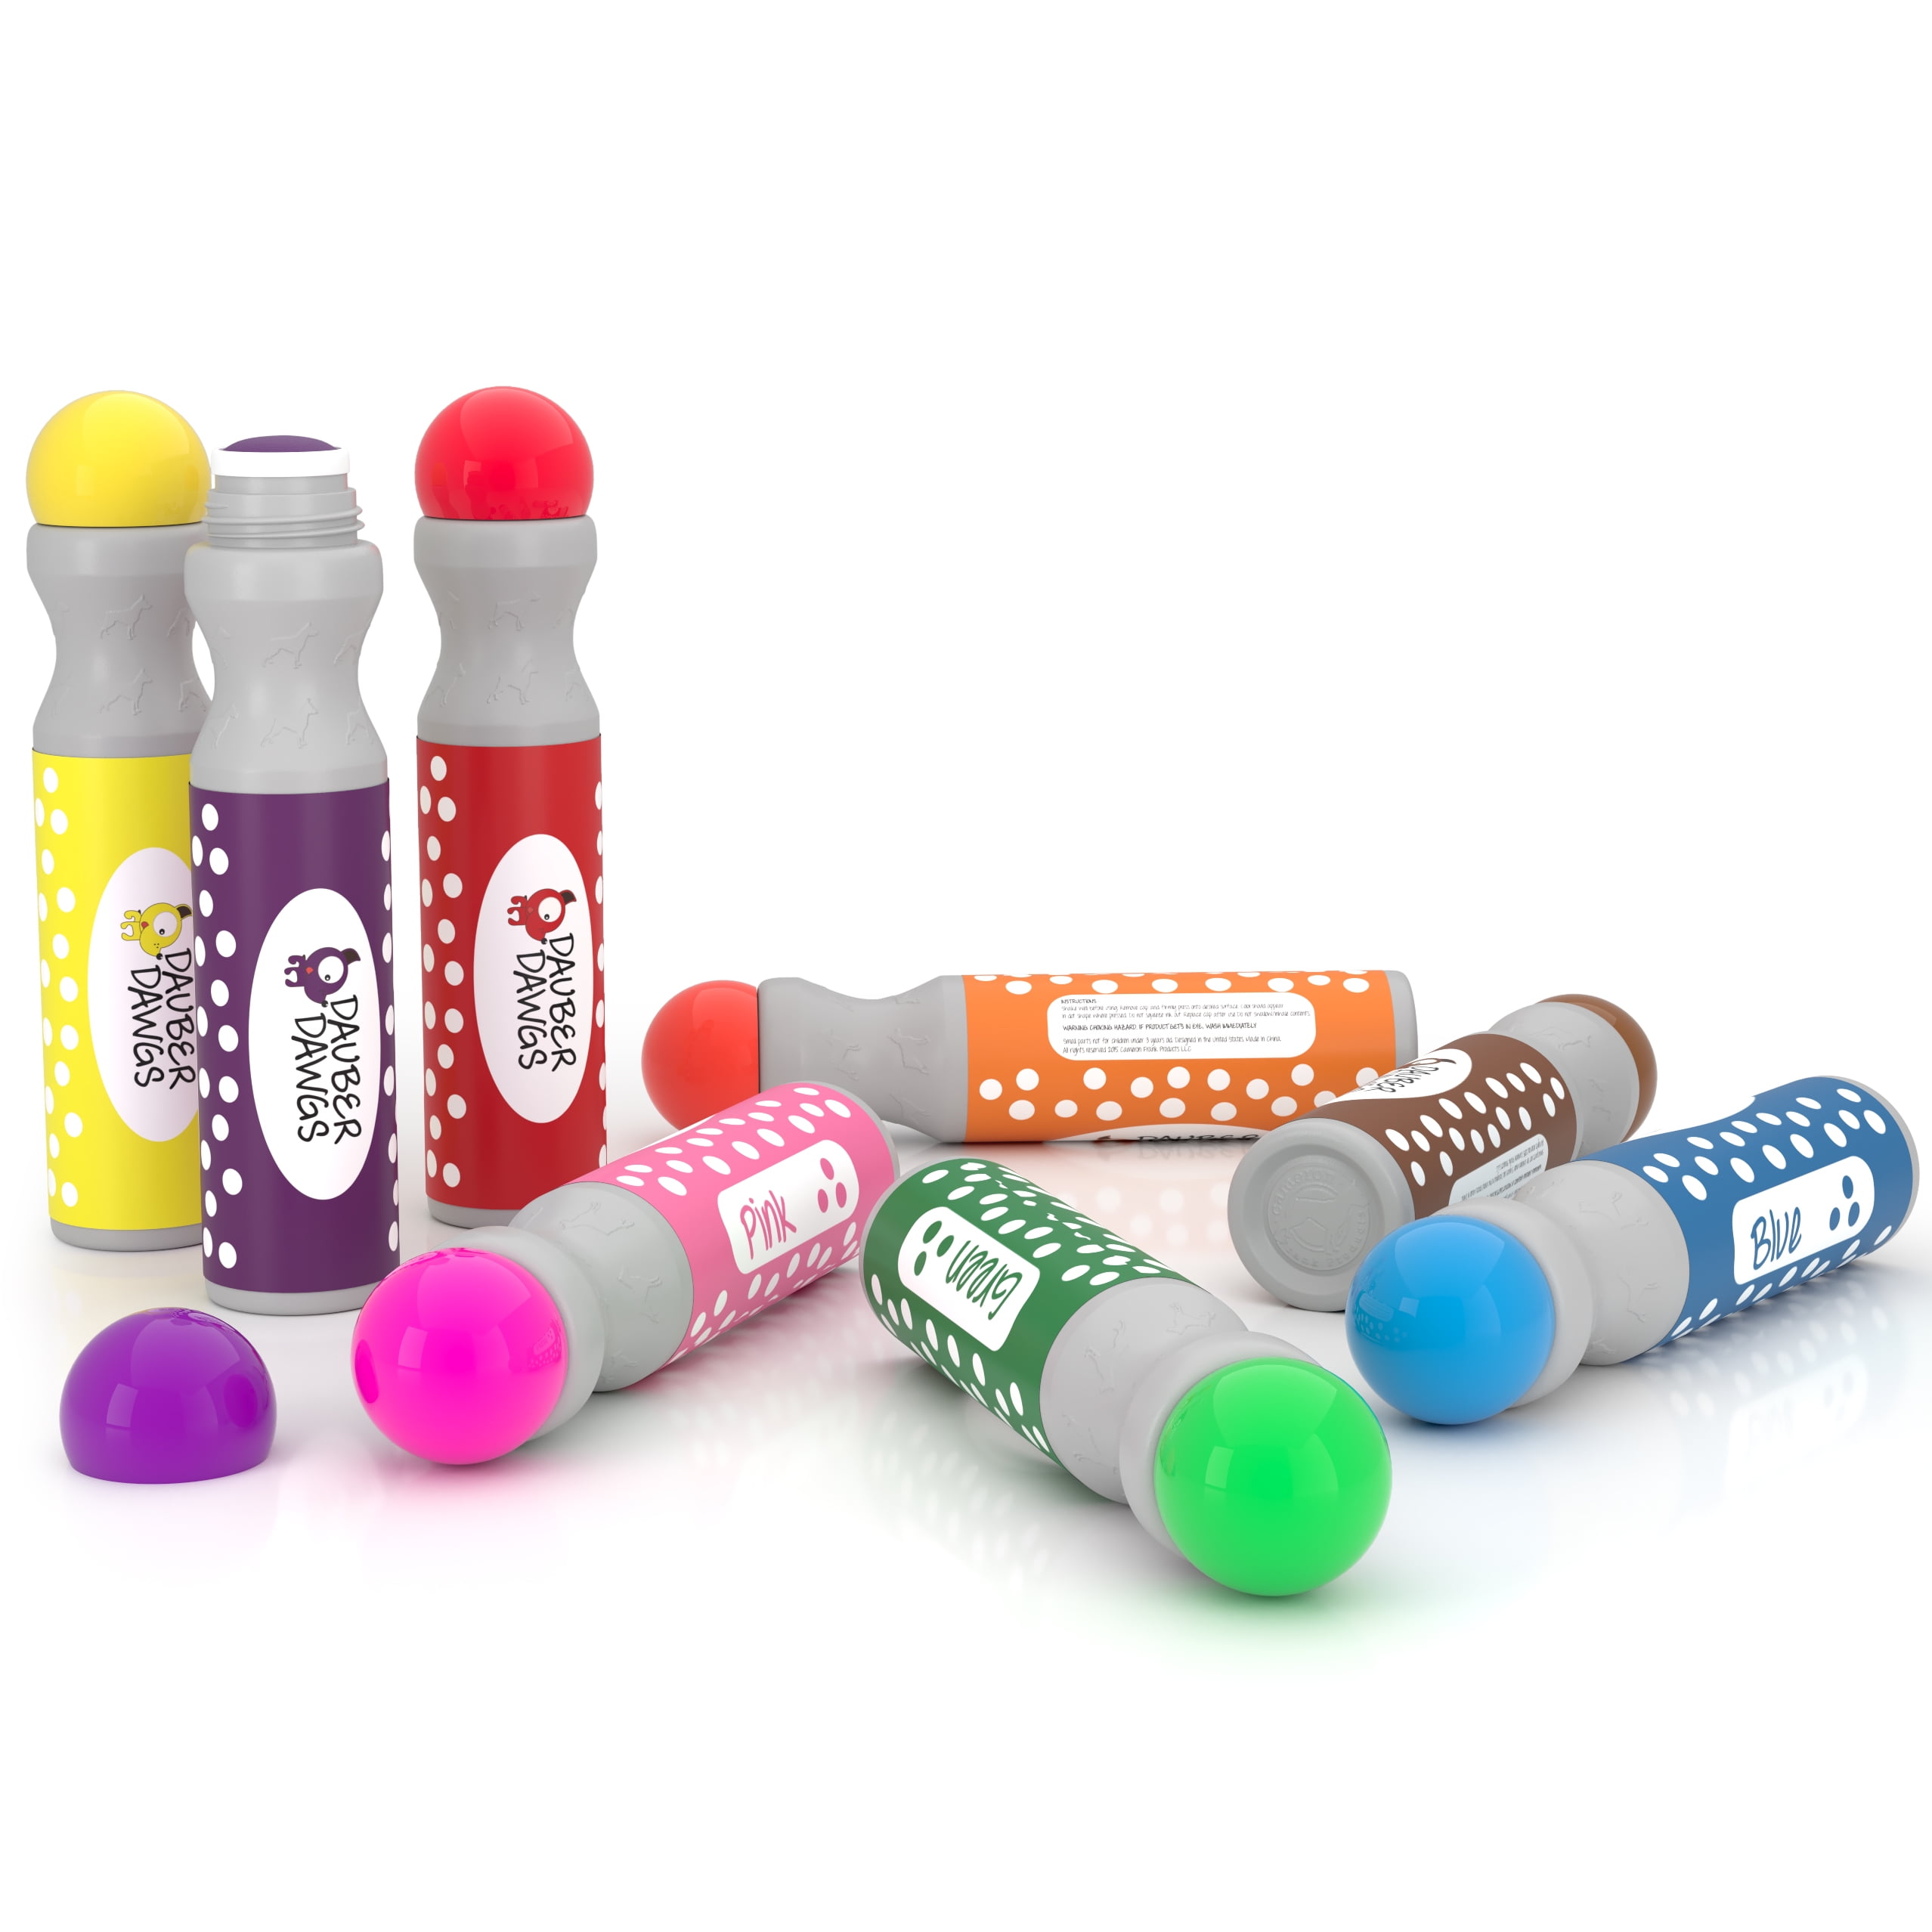 Dot Markers for Kids, Bingo Daubers - Washable - 10 Color Pack, by Glokers